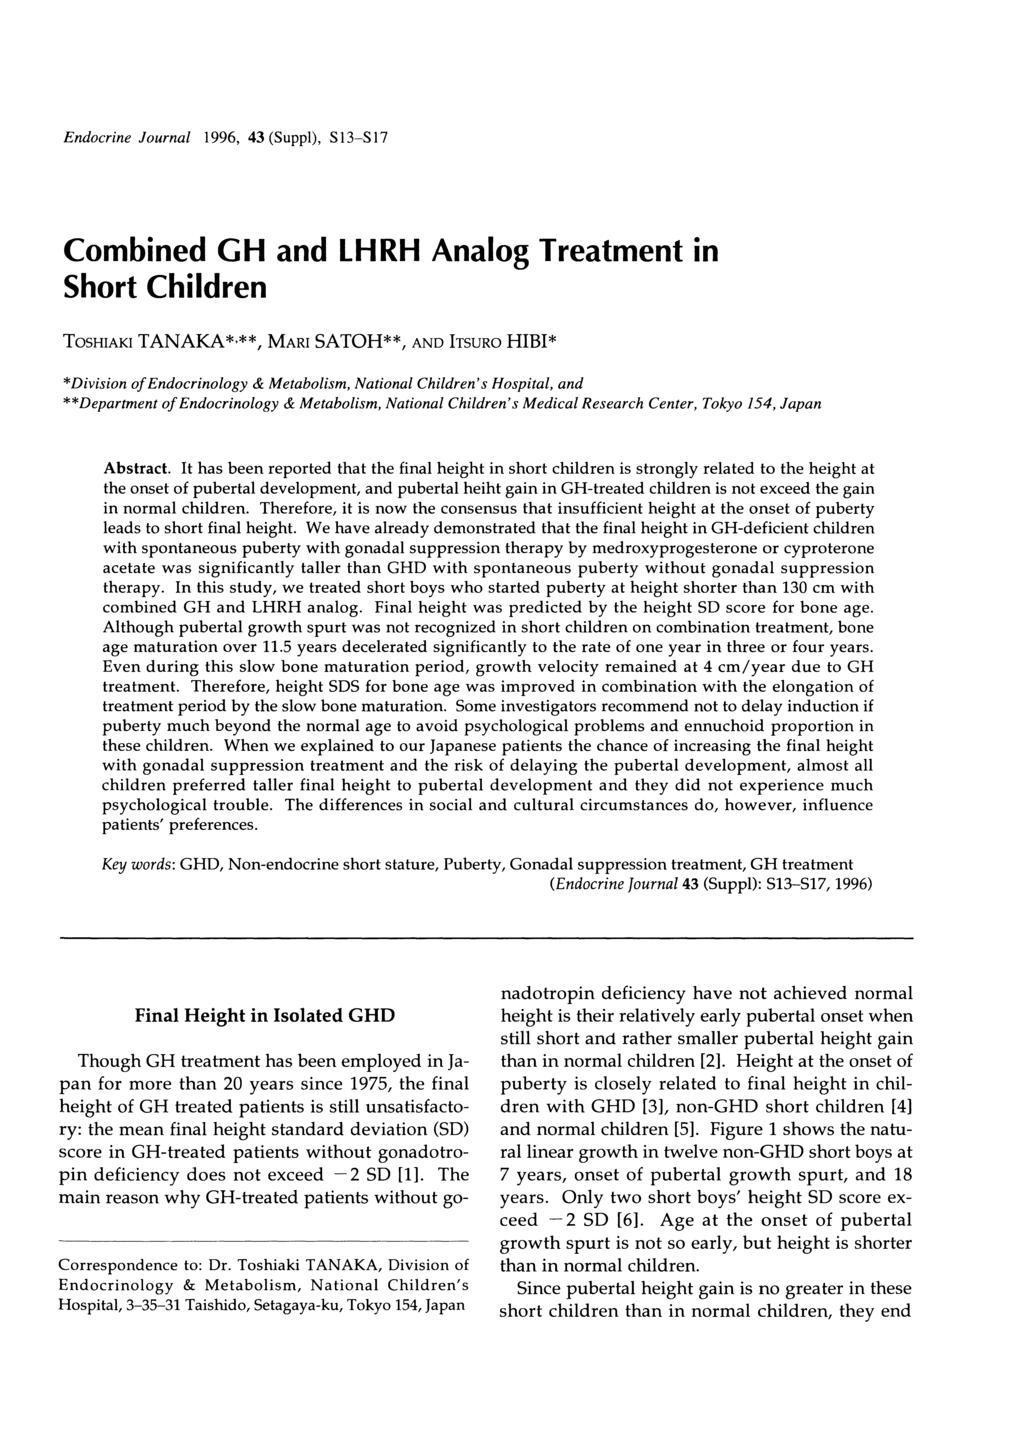 Endocrine Journal 1996, 43 (Suppl), S13-S17 Combined GH Short Children and LHRH Analog Treatment in TosHIAKI TANAKA***, MARL SATOH**, AND ITSURo HIBI* *Division of Endocrinology & Metabolism,